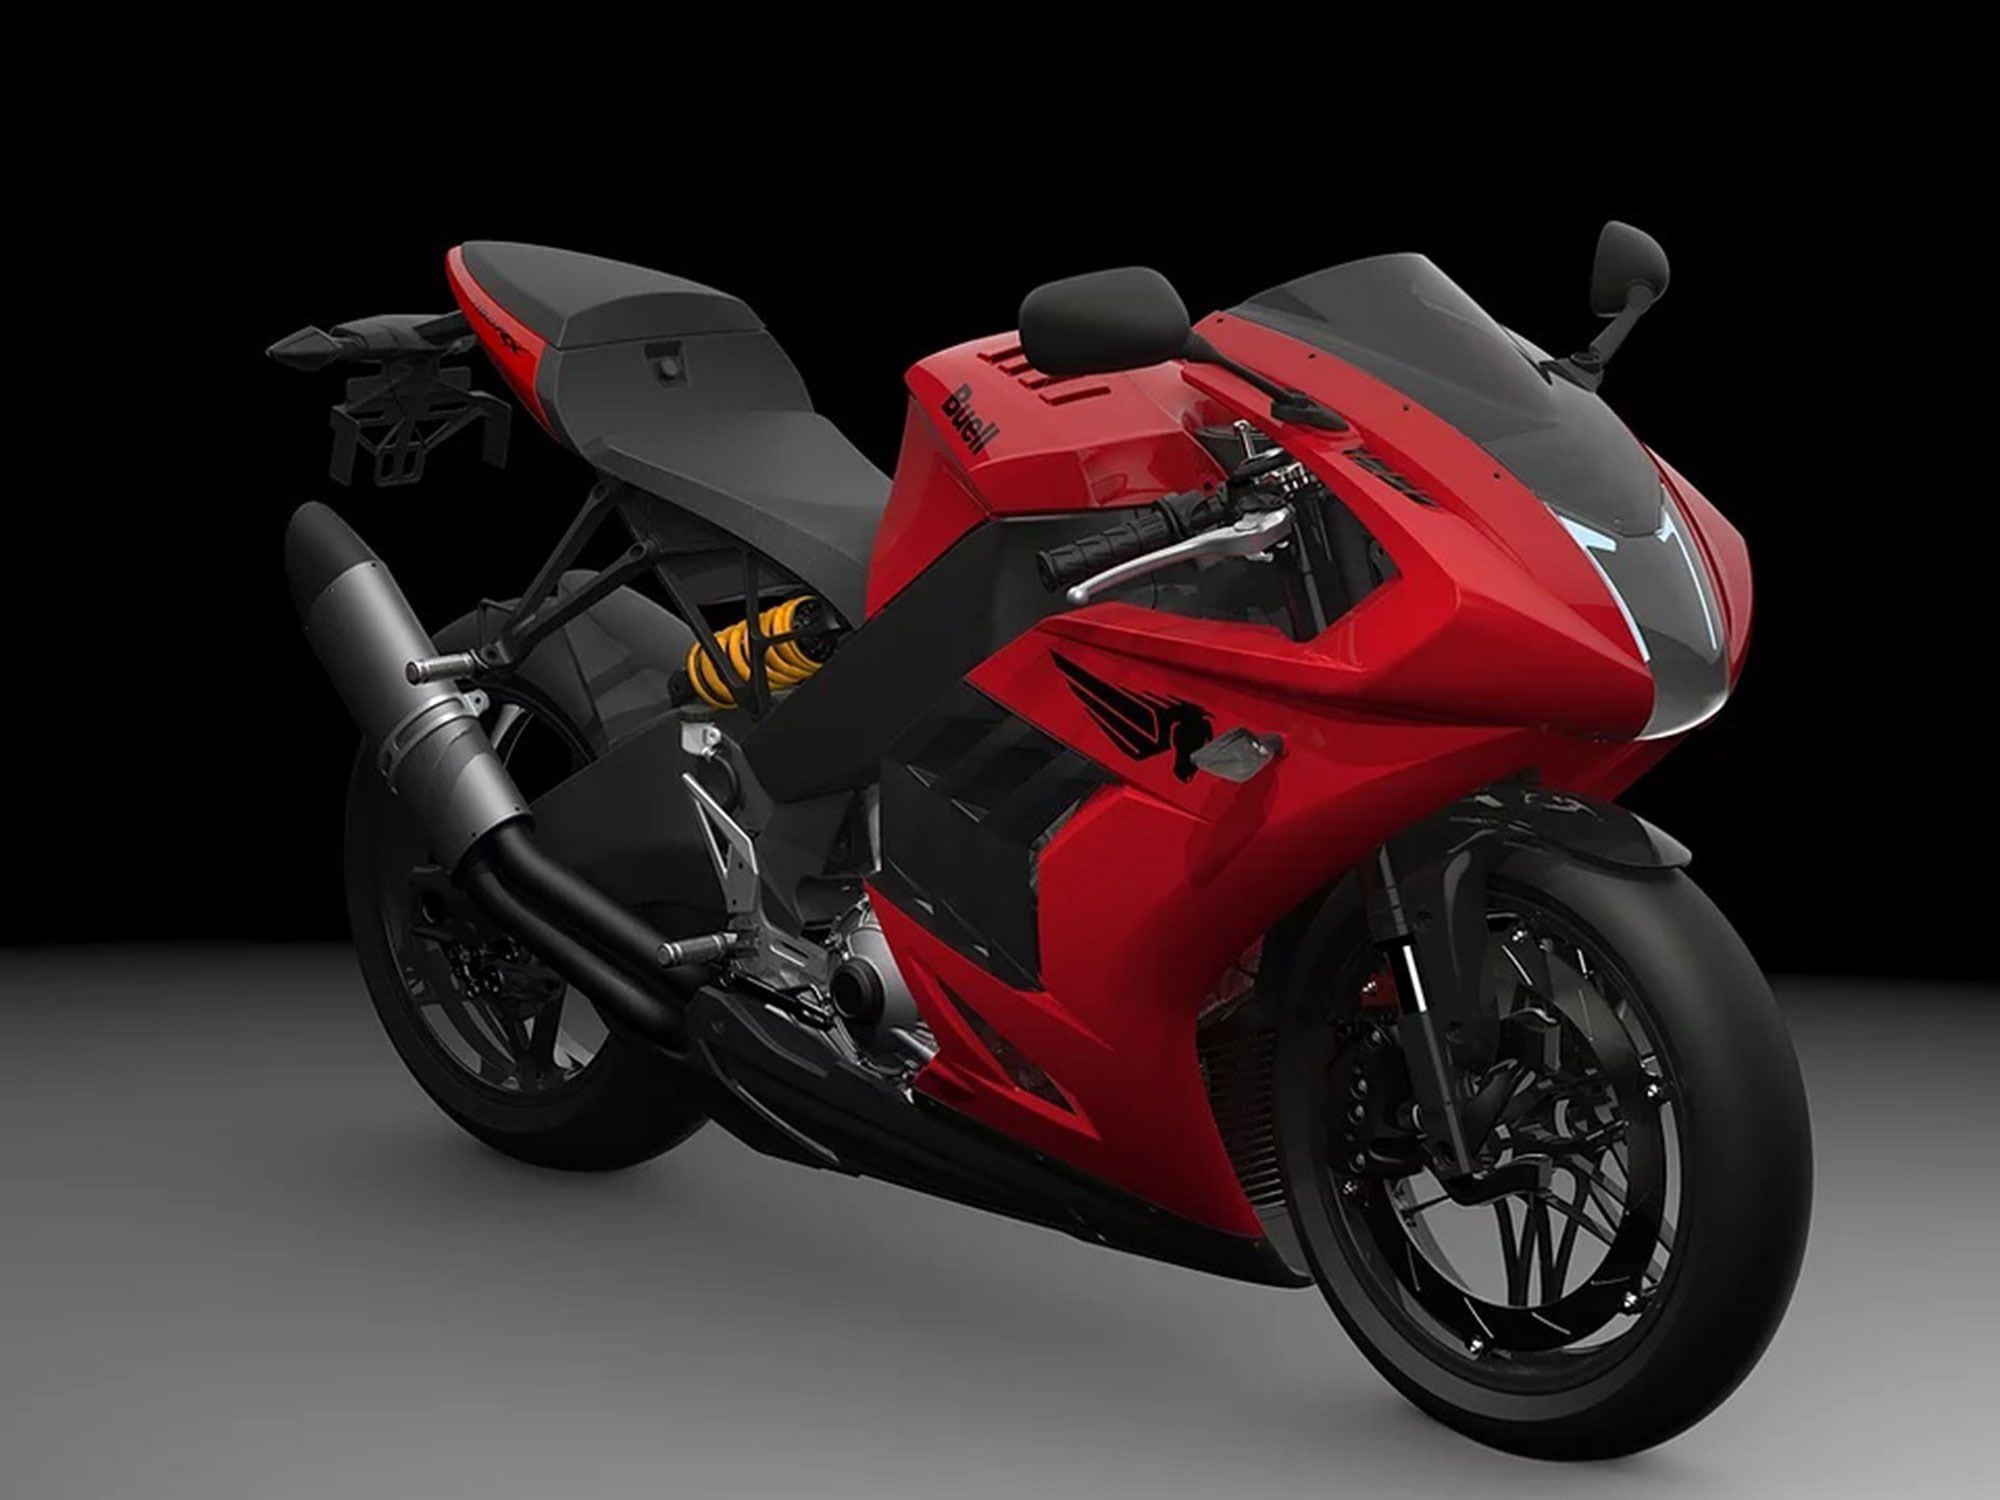 A superbike based on the same EBR 1190RX platform is also said to be in the works.